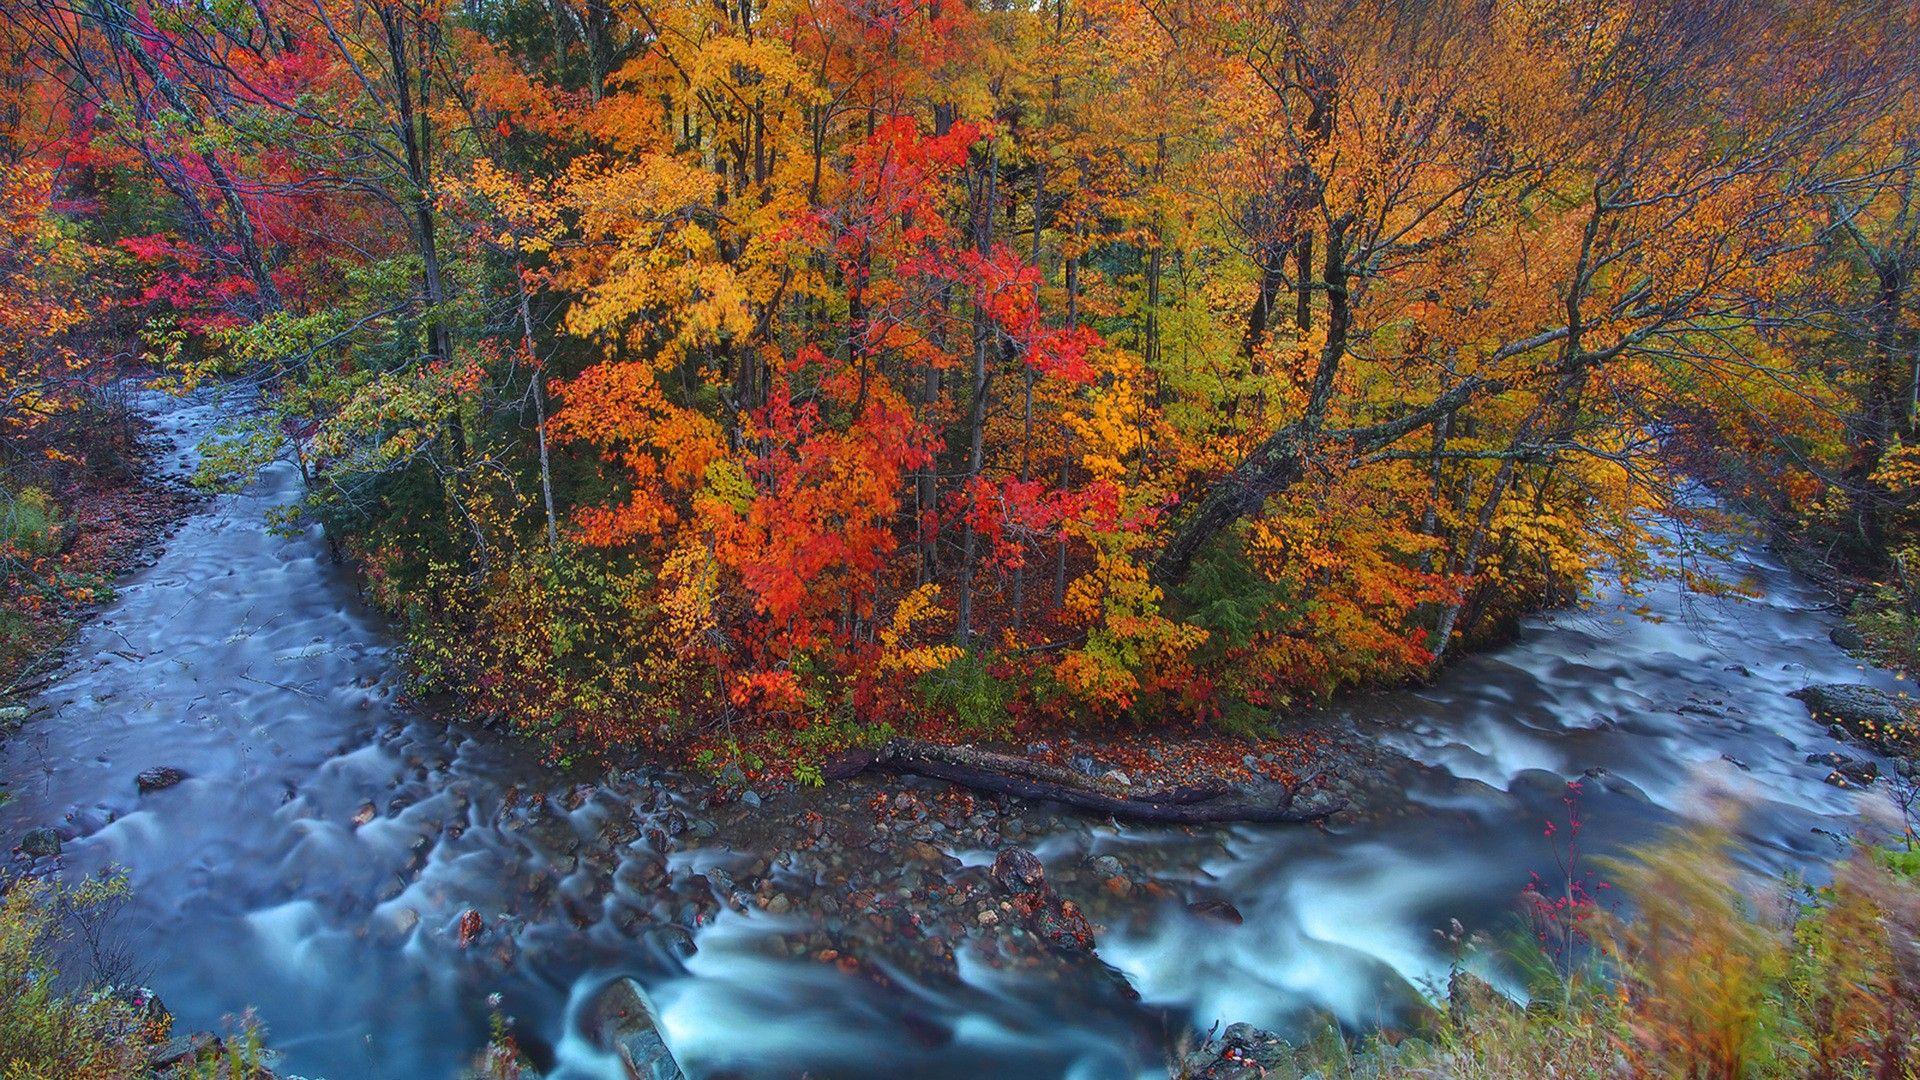 Rivers: River Horseshoe Bend Vermont Autumn Forest Full HD 1080p